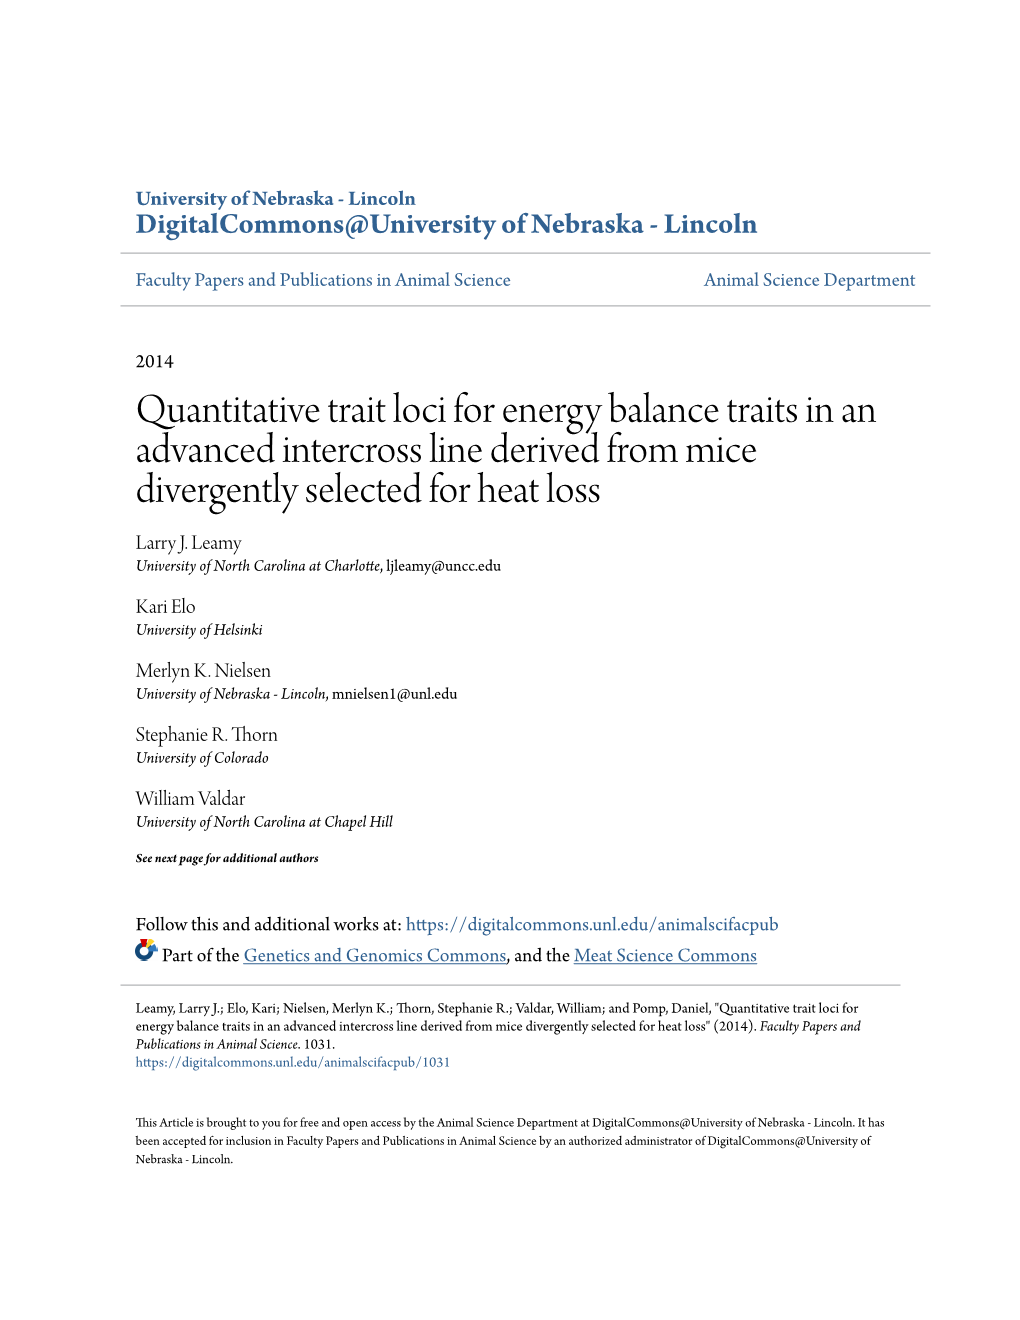 Quantitative Trait Loci for Energy Balance Traits in an Advanced Intercross Line Derived from Mice Divergently Selected for Heat Loss Larry J